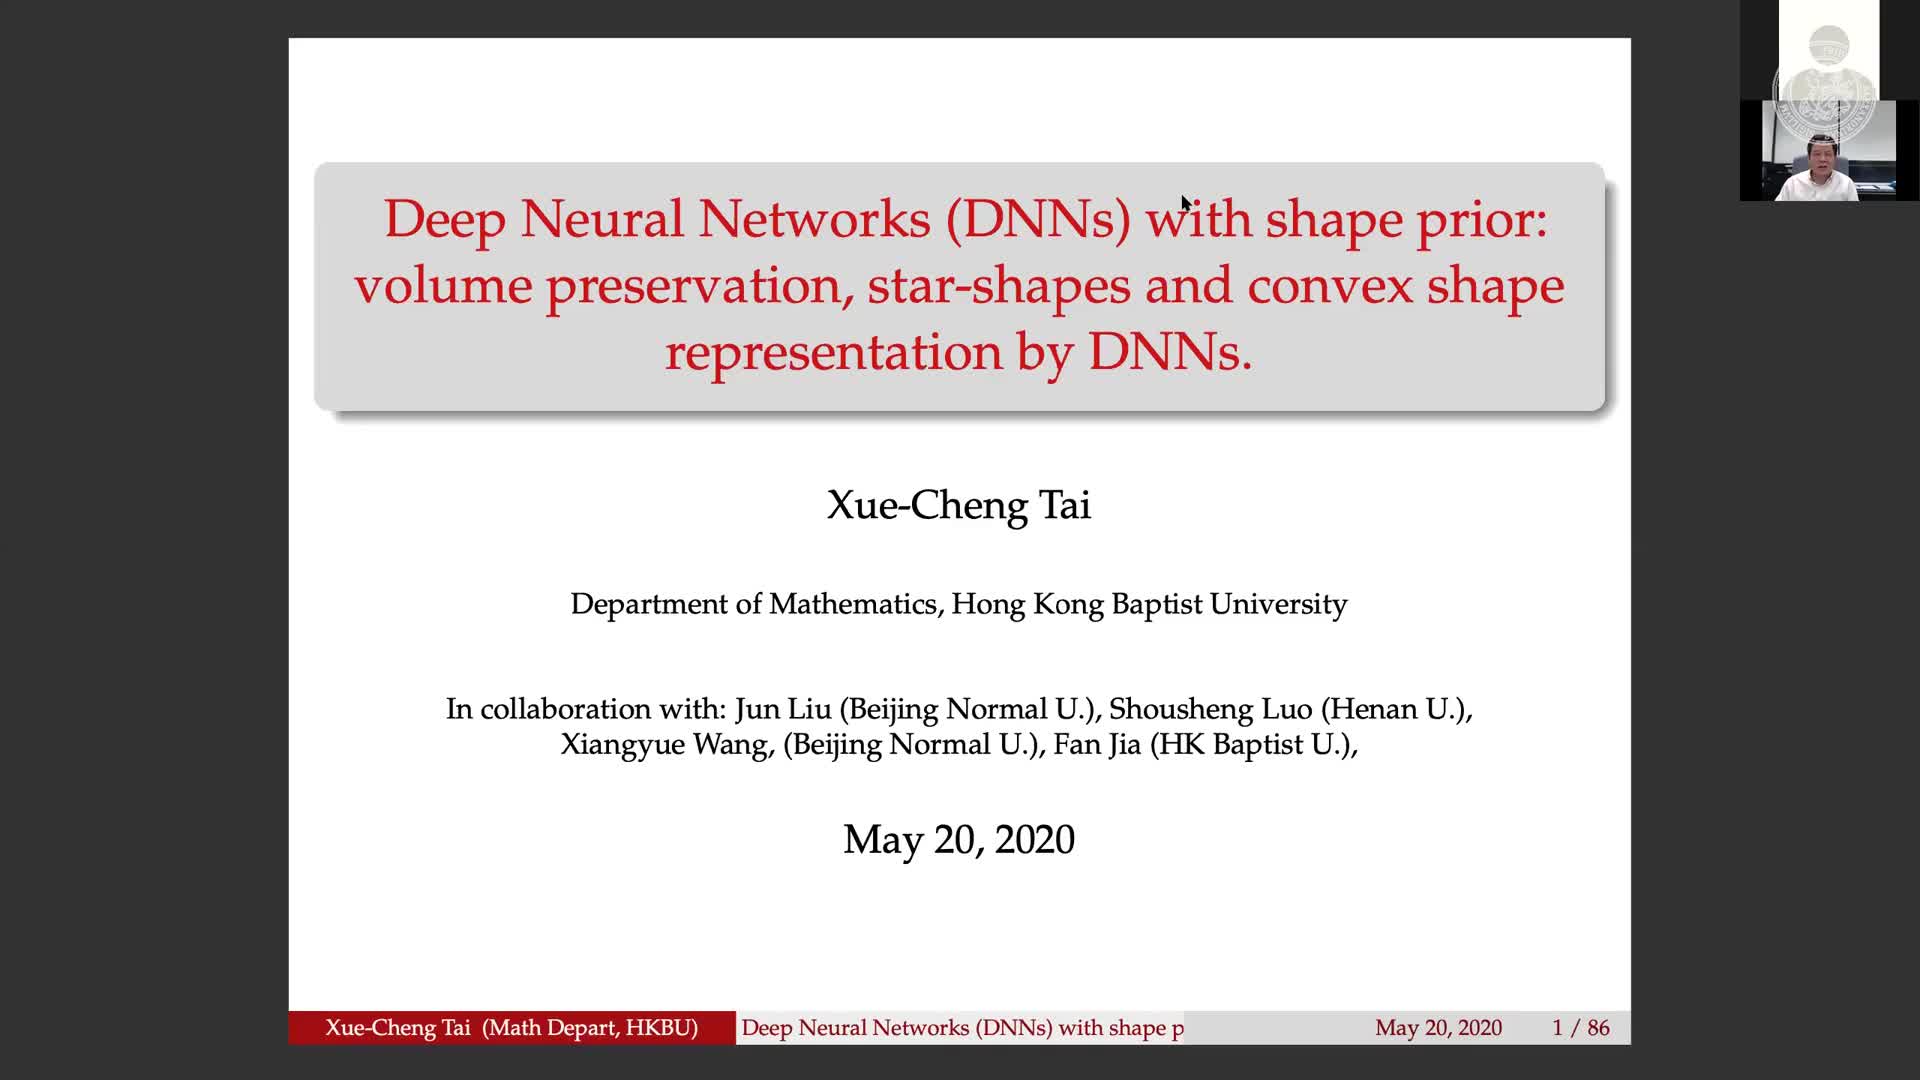 Deep Neural Networks (DNNs) with shape prior: volume preservation, Star-shapes and convex shape representation by DNNs (Xue-Cheng Tai, Hong Kong Baptist University.) preview image